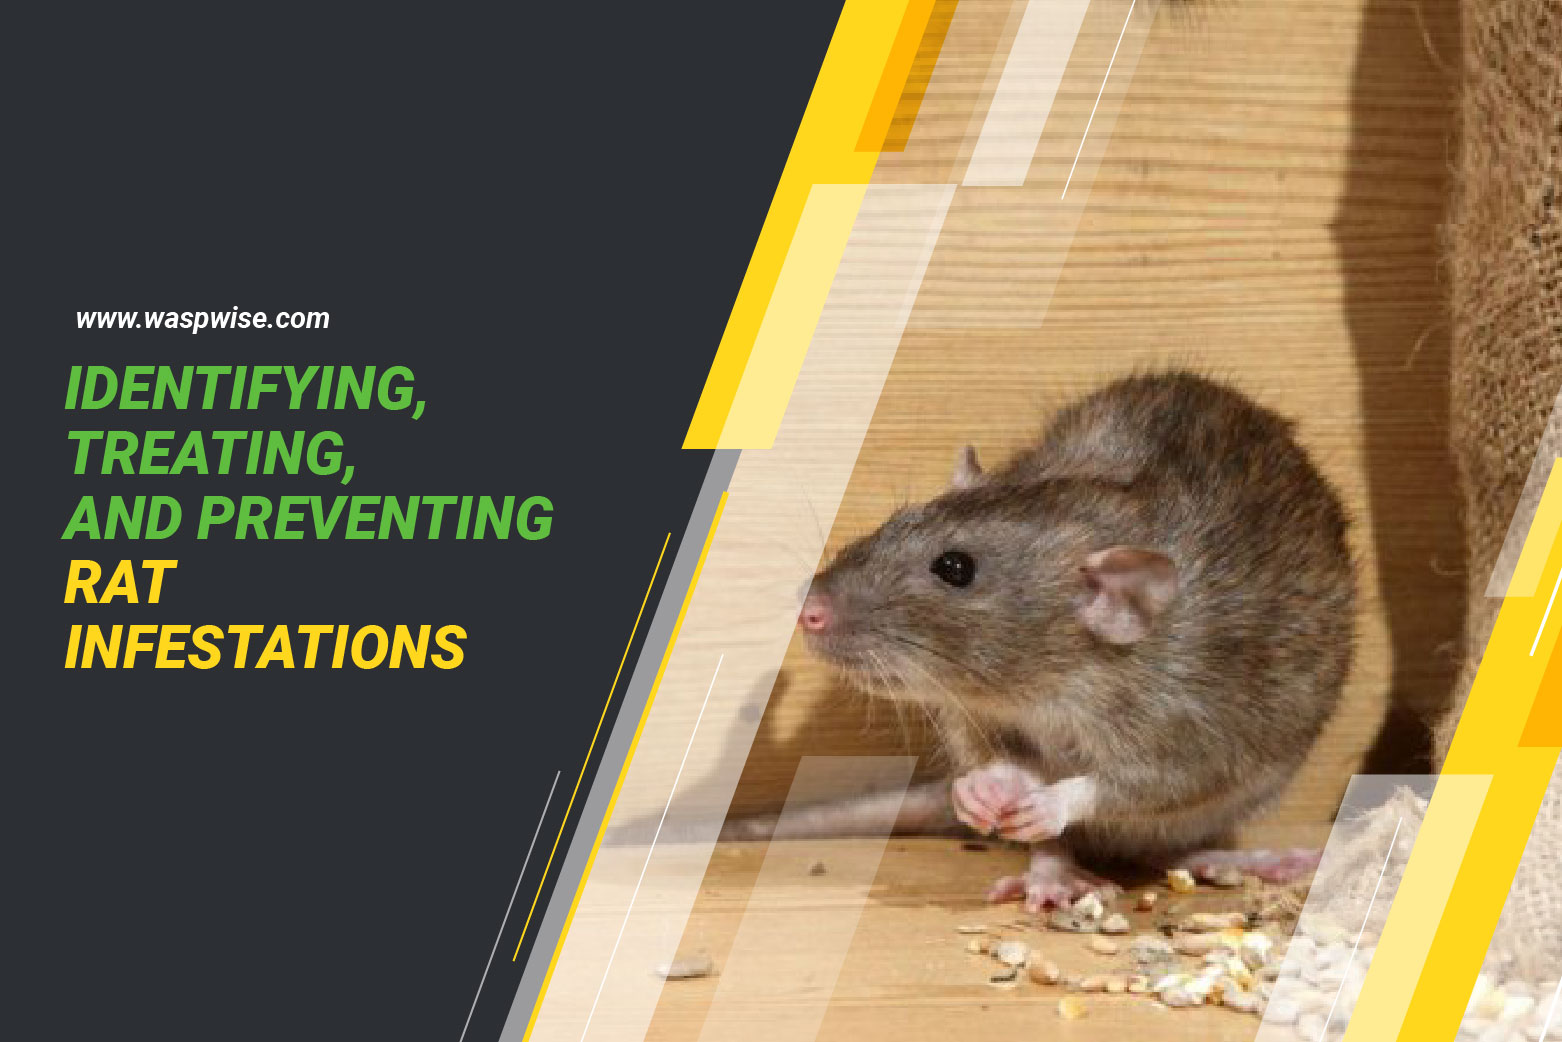 Identifying, treating and preventing rat infestation